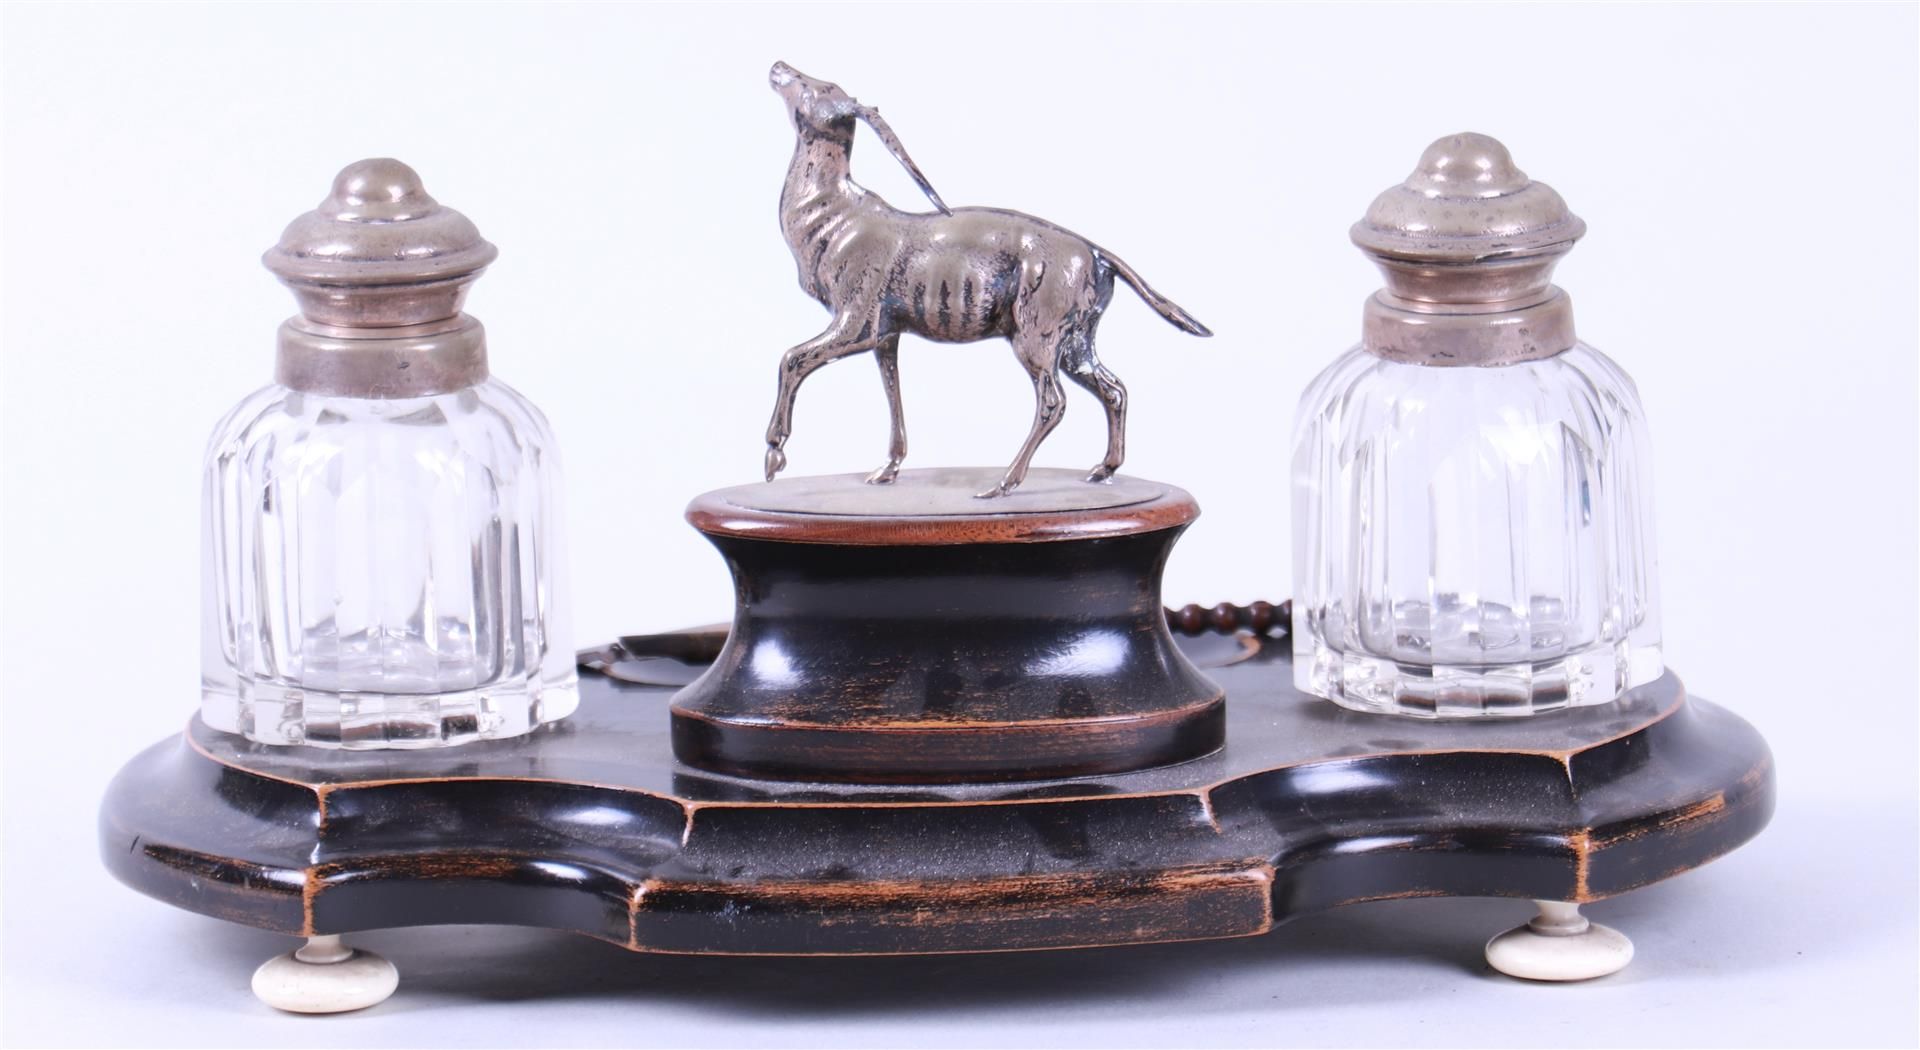 19th Century Inkstand with Silver Deer and Lids on Jars - Image 3 of 3